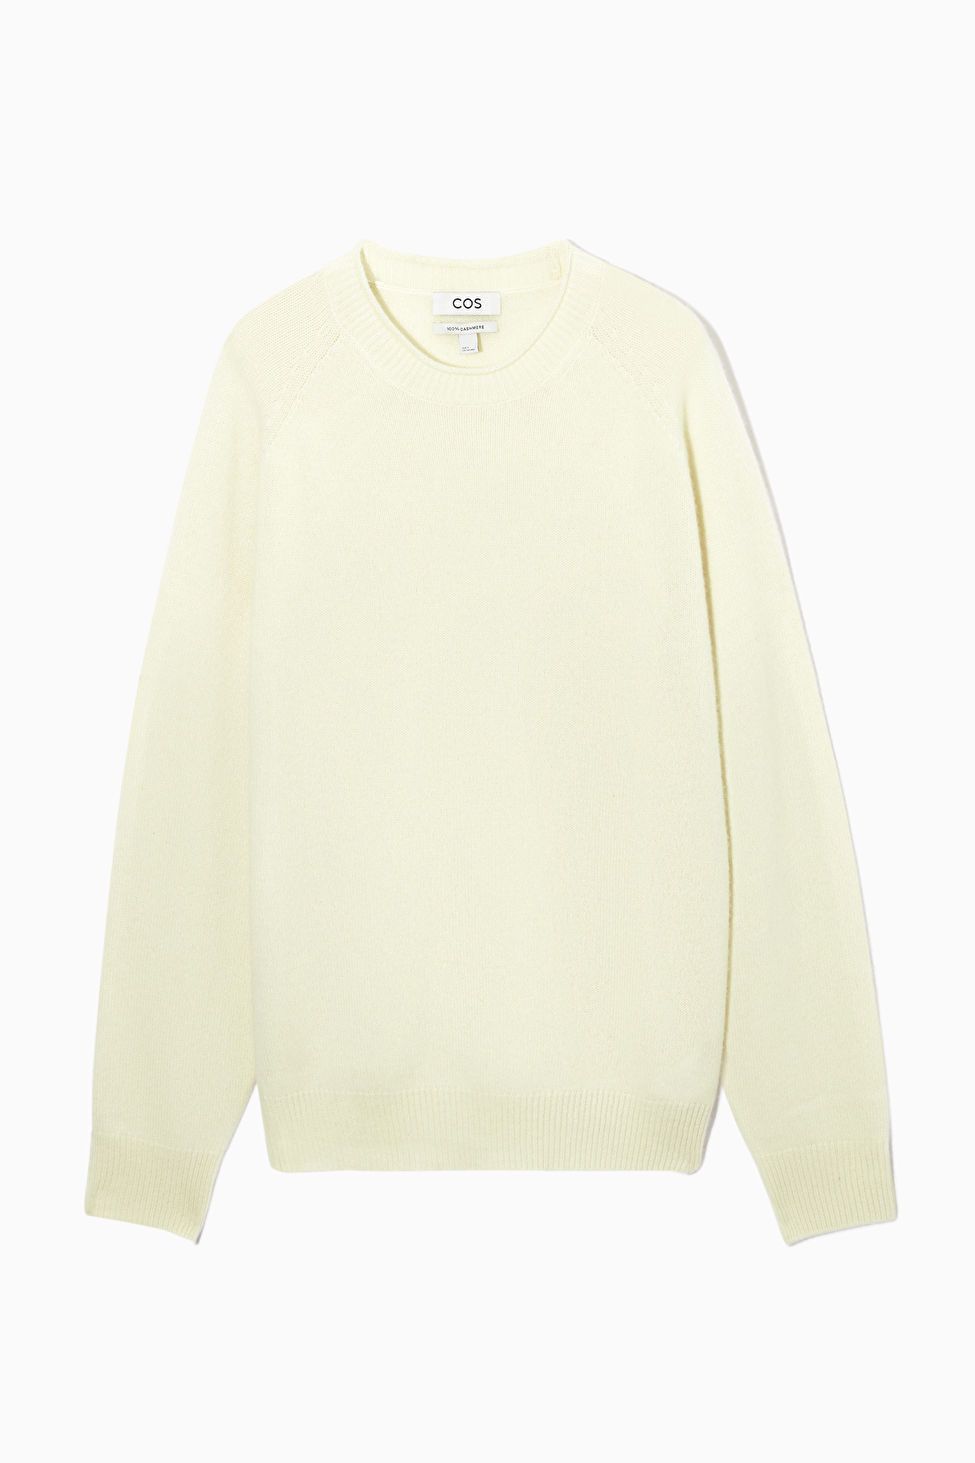 RELAXED-FIT PURE CASHMERE TOP - CREAM - COS | COS UK